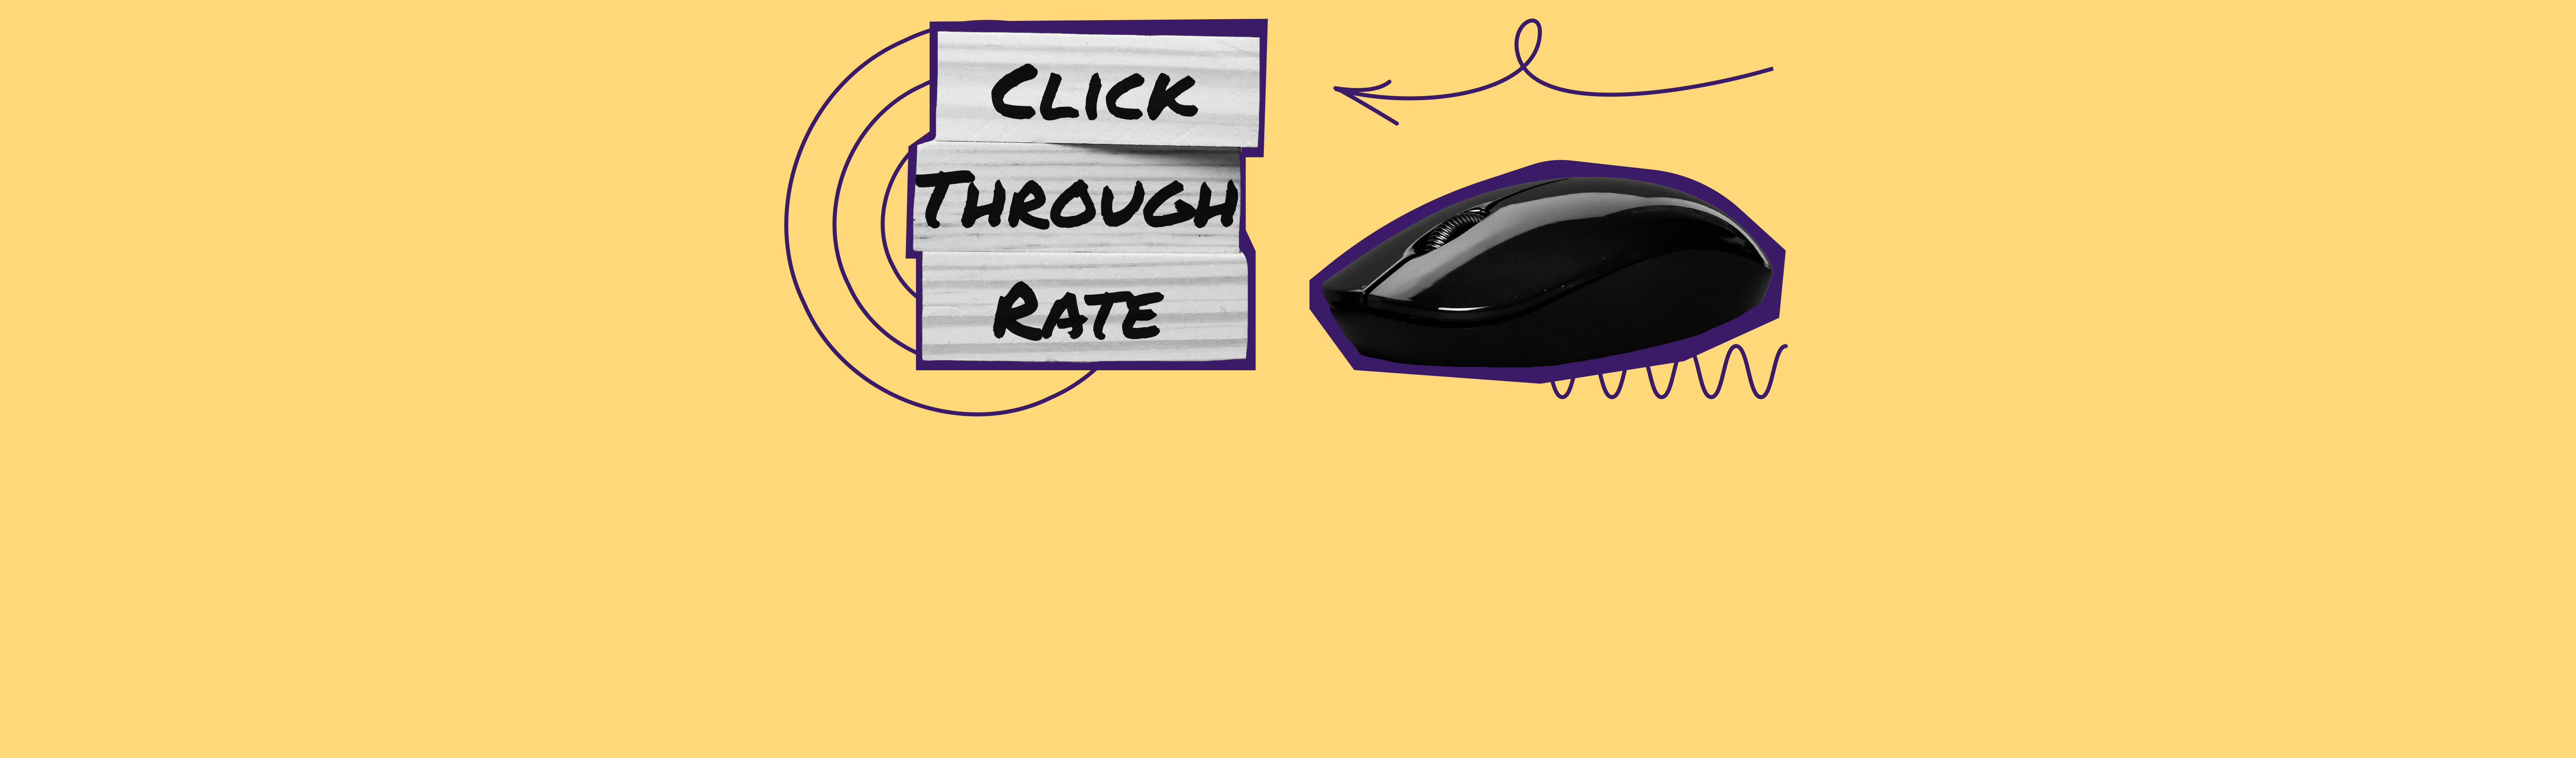 Email Marketing Click-Through Rate Explained